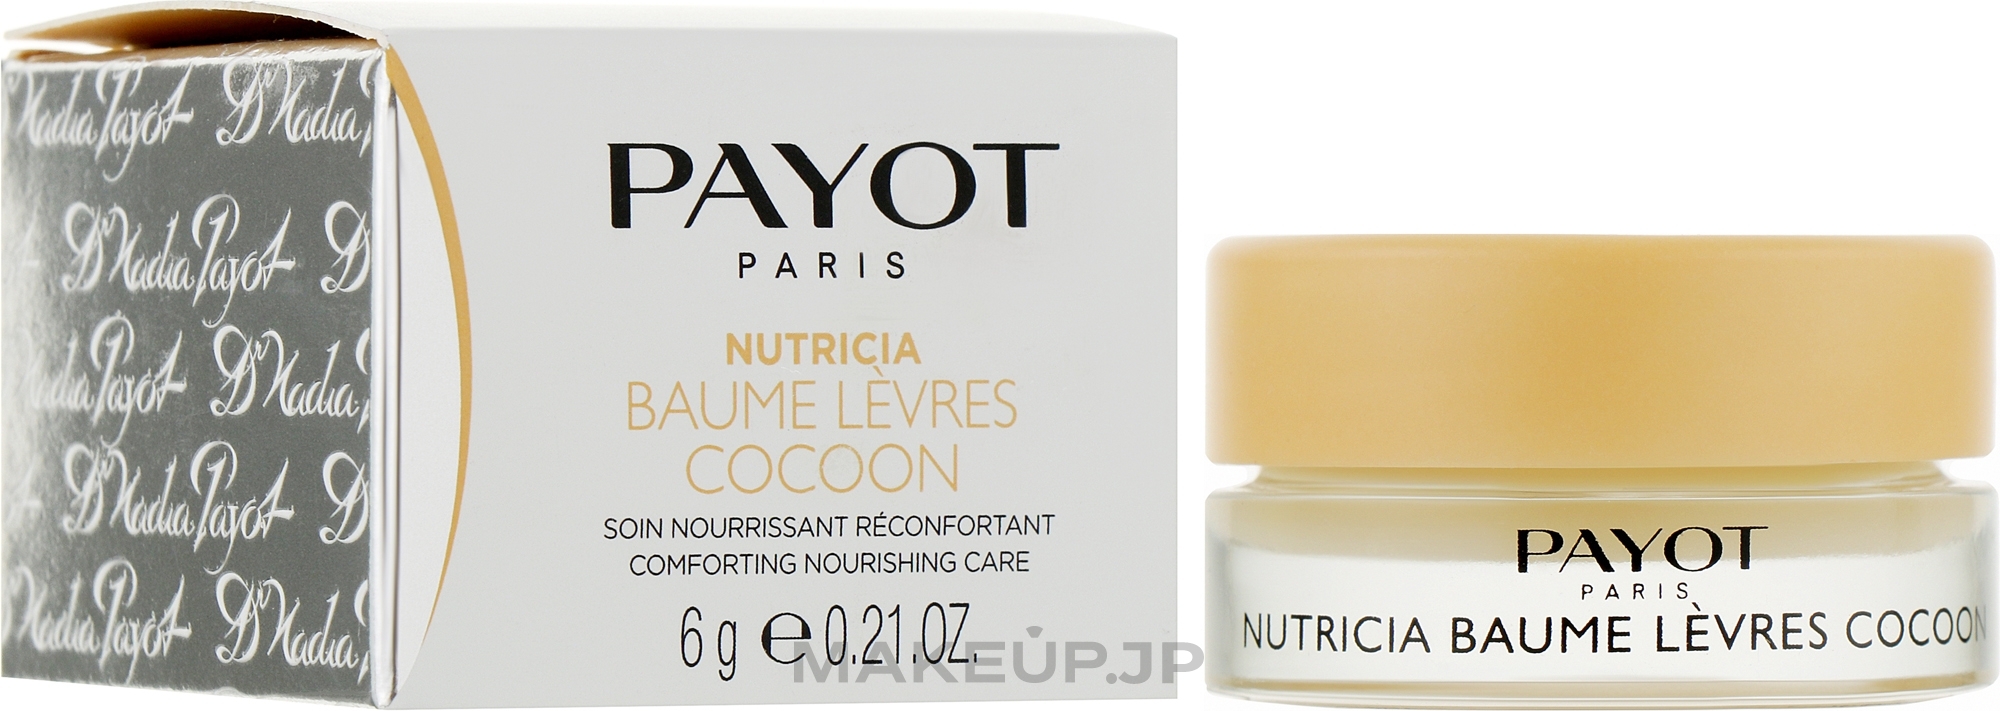 Lip Balm - Payot Nutricia Baume Levres Cocoon Comforting Nourishing Care — photo 6 g